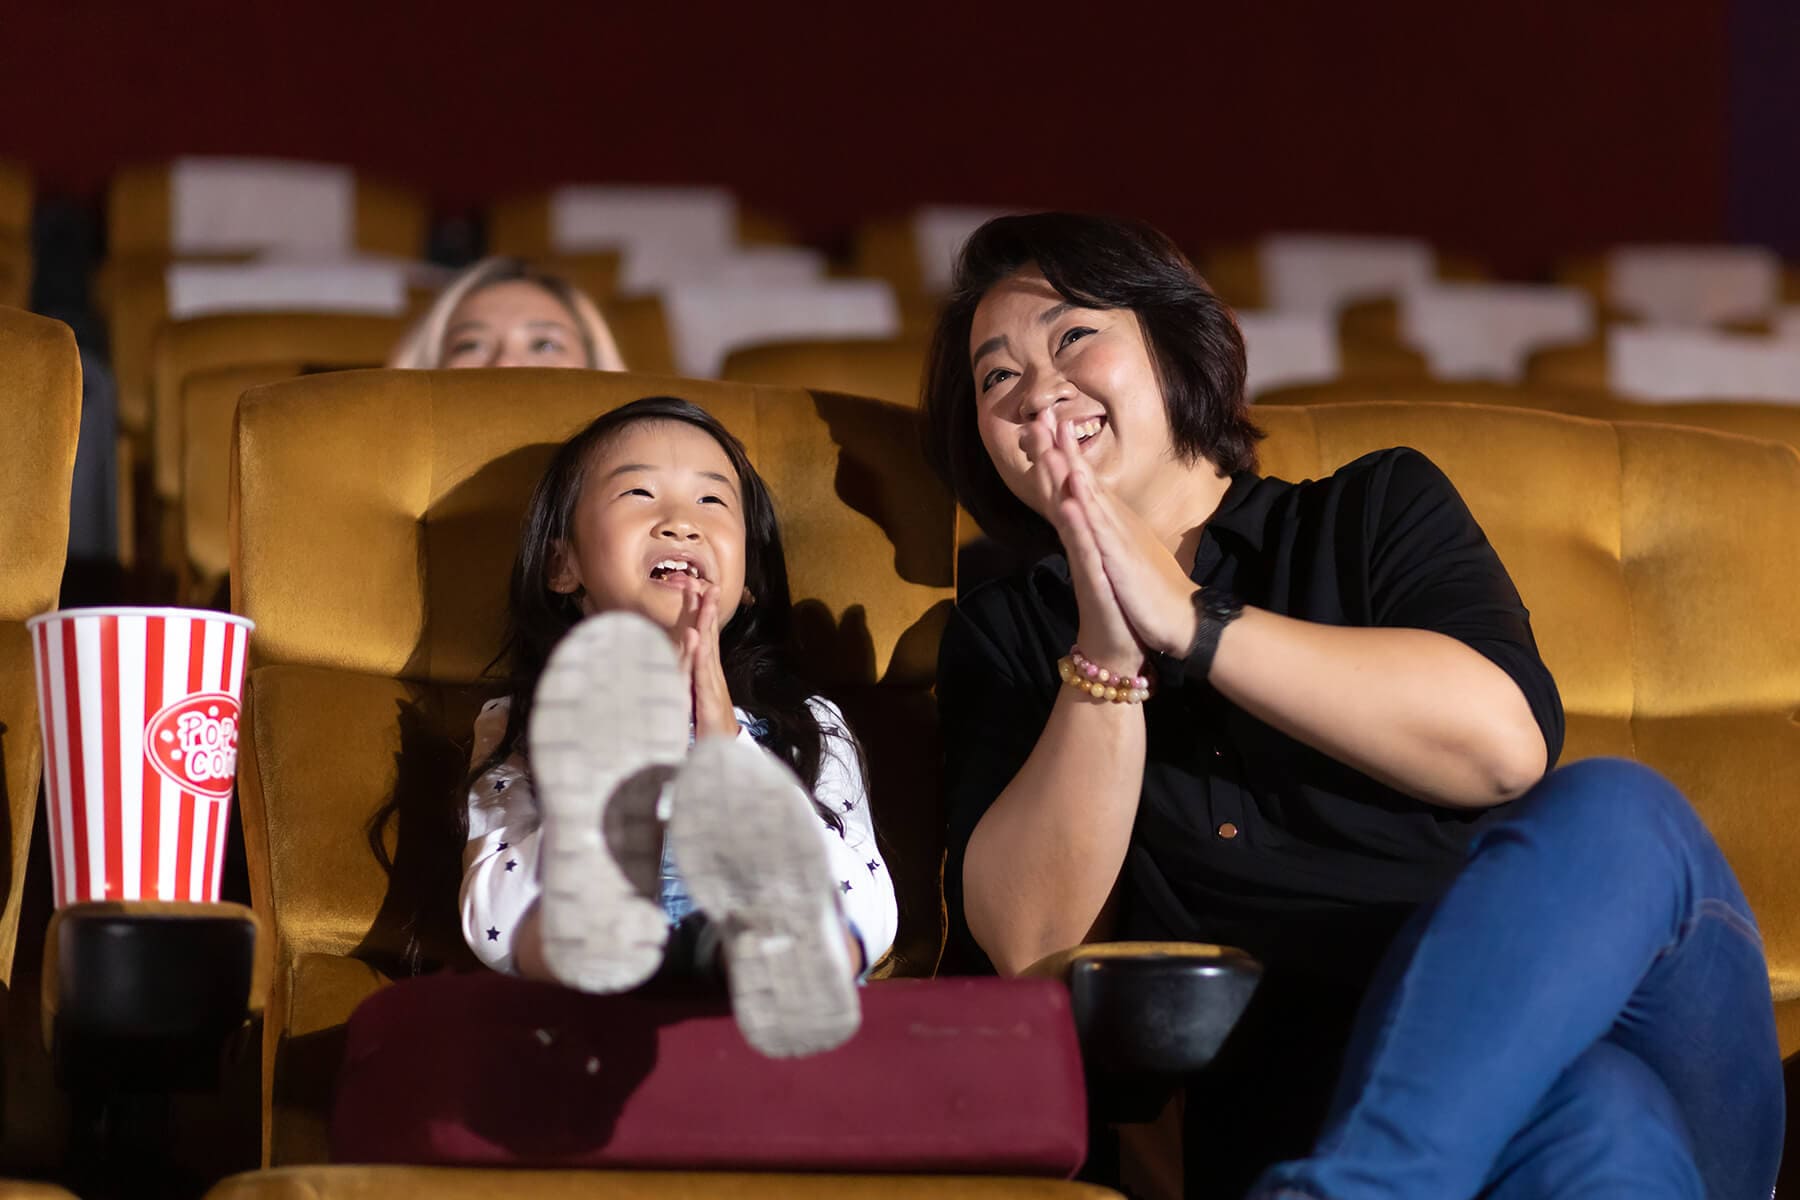 Catch your favourite stars on the big screen at TGV Cinemas. From the latest international blockbusters to heartwarming local dramas, TGV has a diverse range of entertainment for everyone.